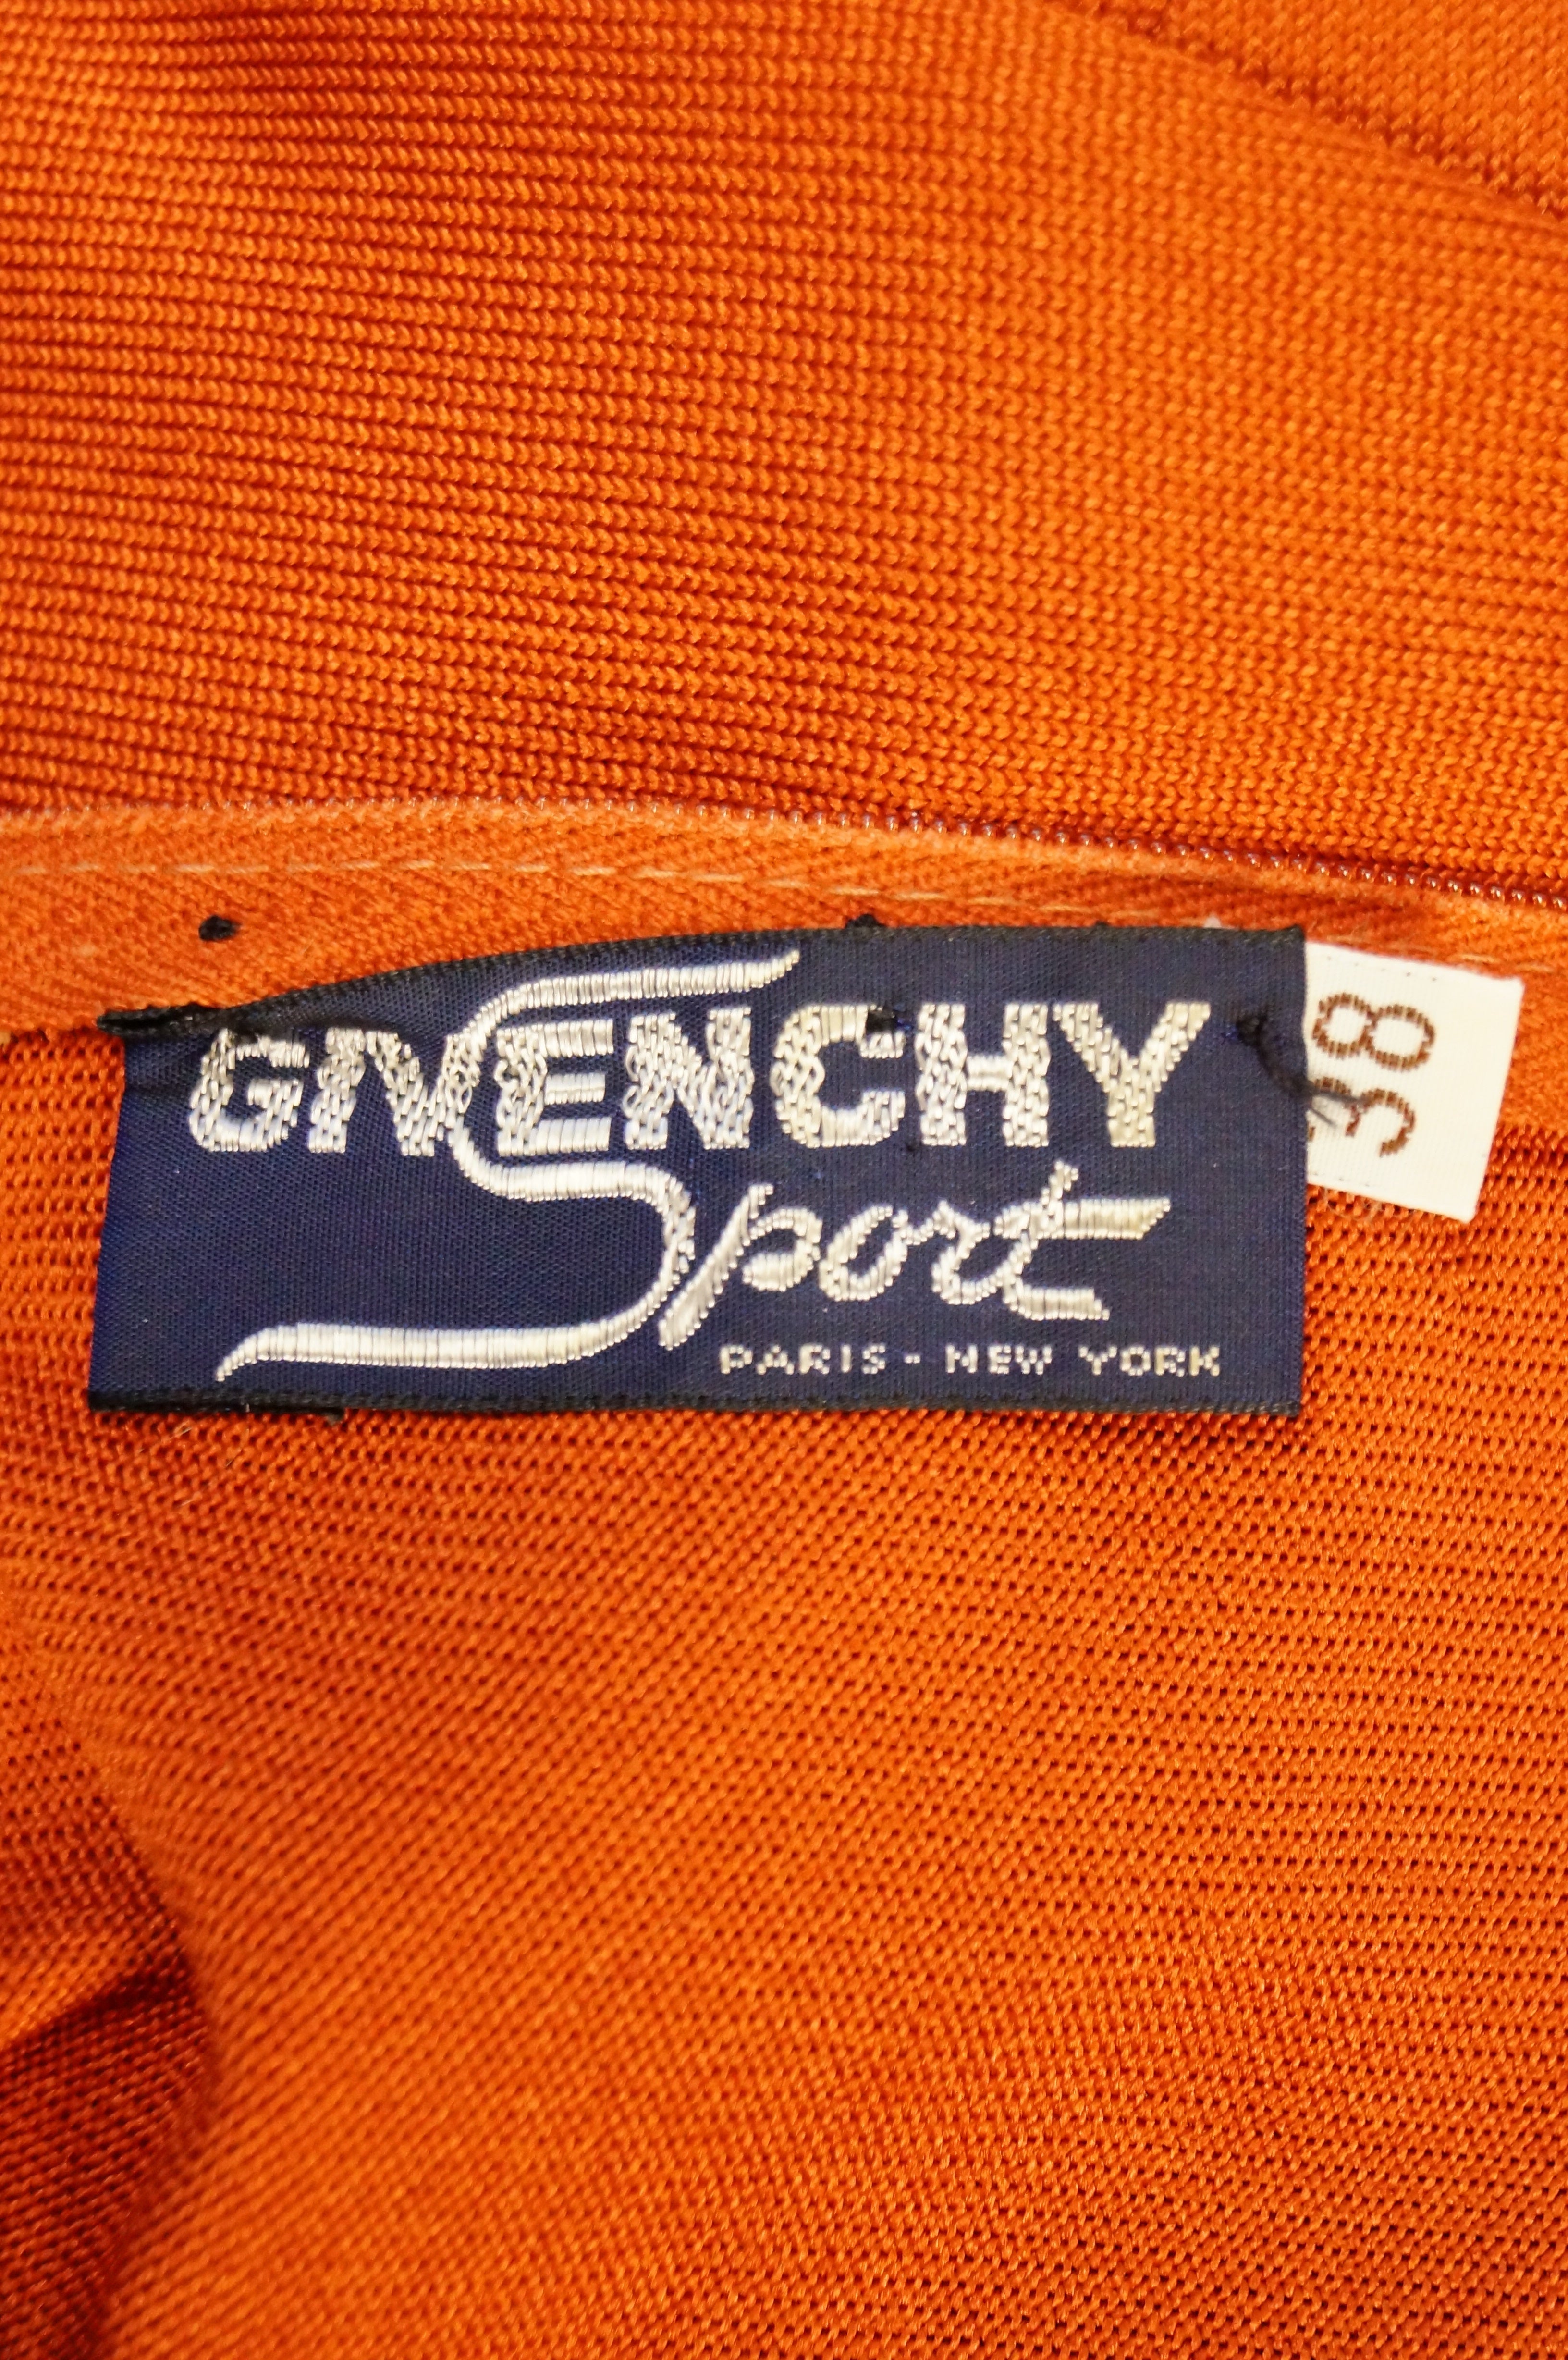 givenchy sport